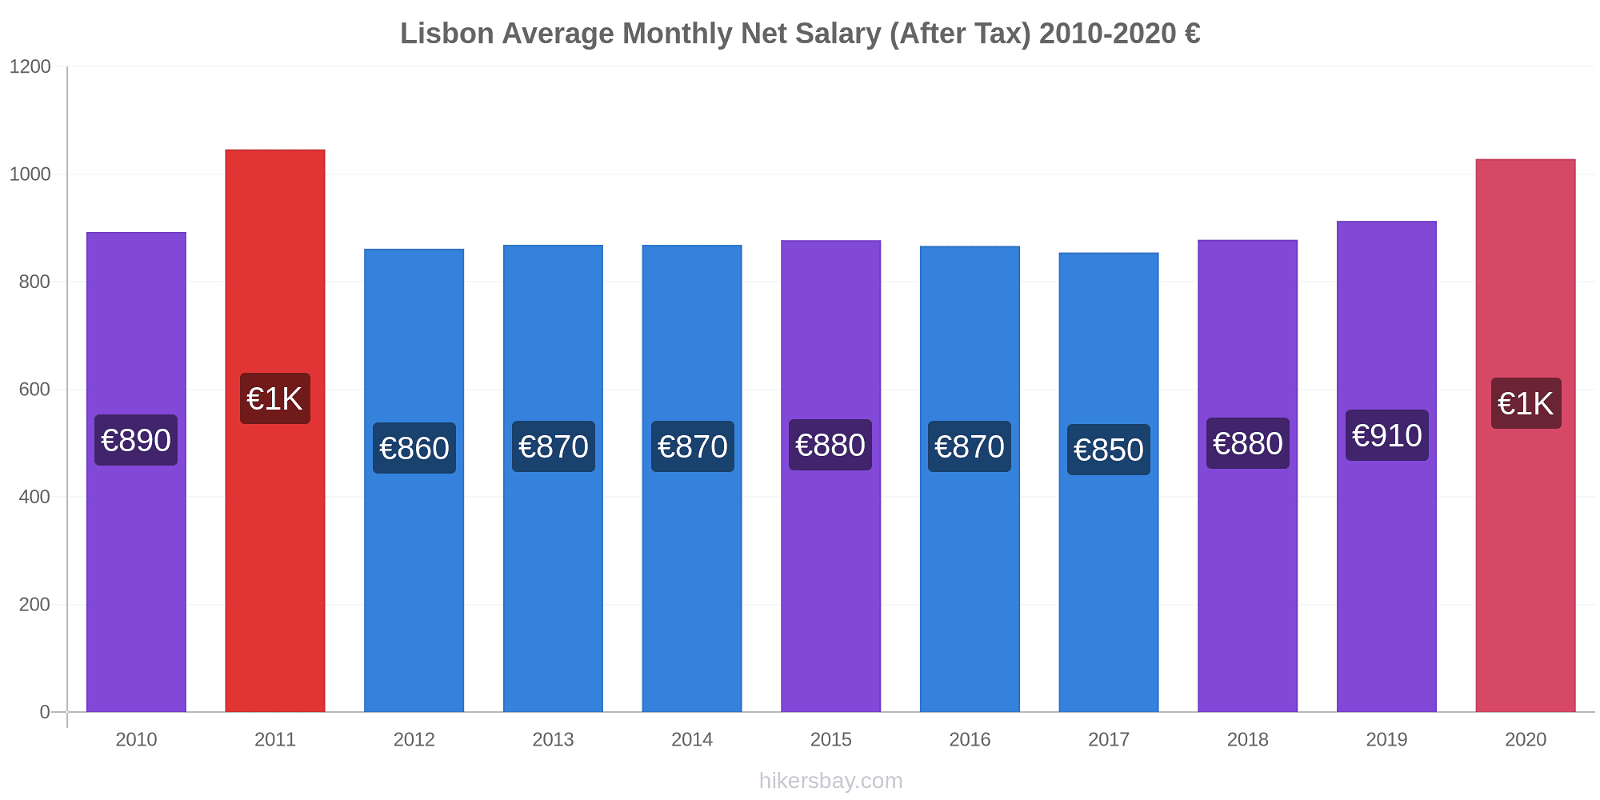 Lisbon price changes Average Monthly Net Salary (After Tax) hikersbay.com